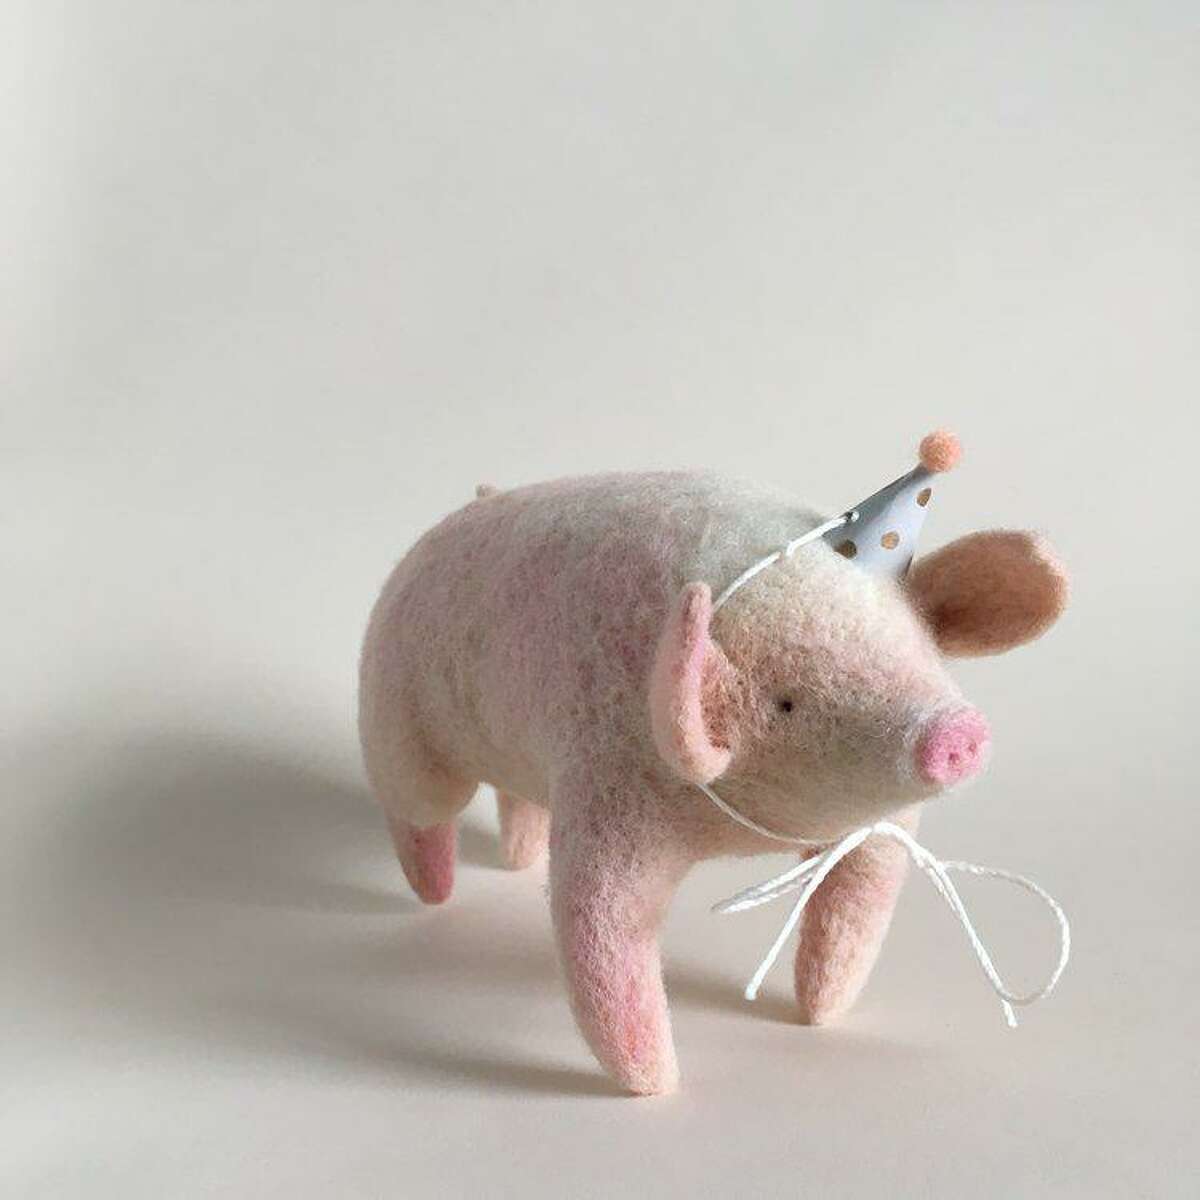 Petit Felts, which produced this festive pig, will be one of the artisans at Wilton Historical Society’s American Artisan Show.